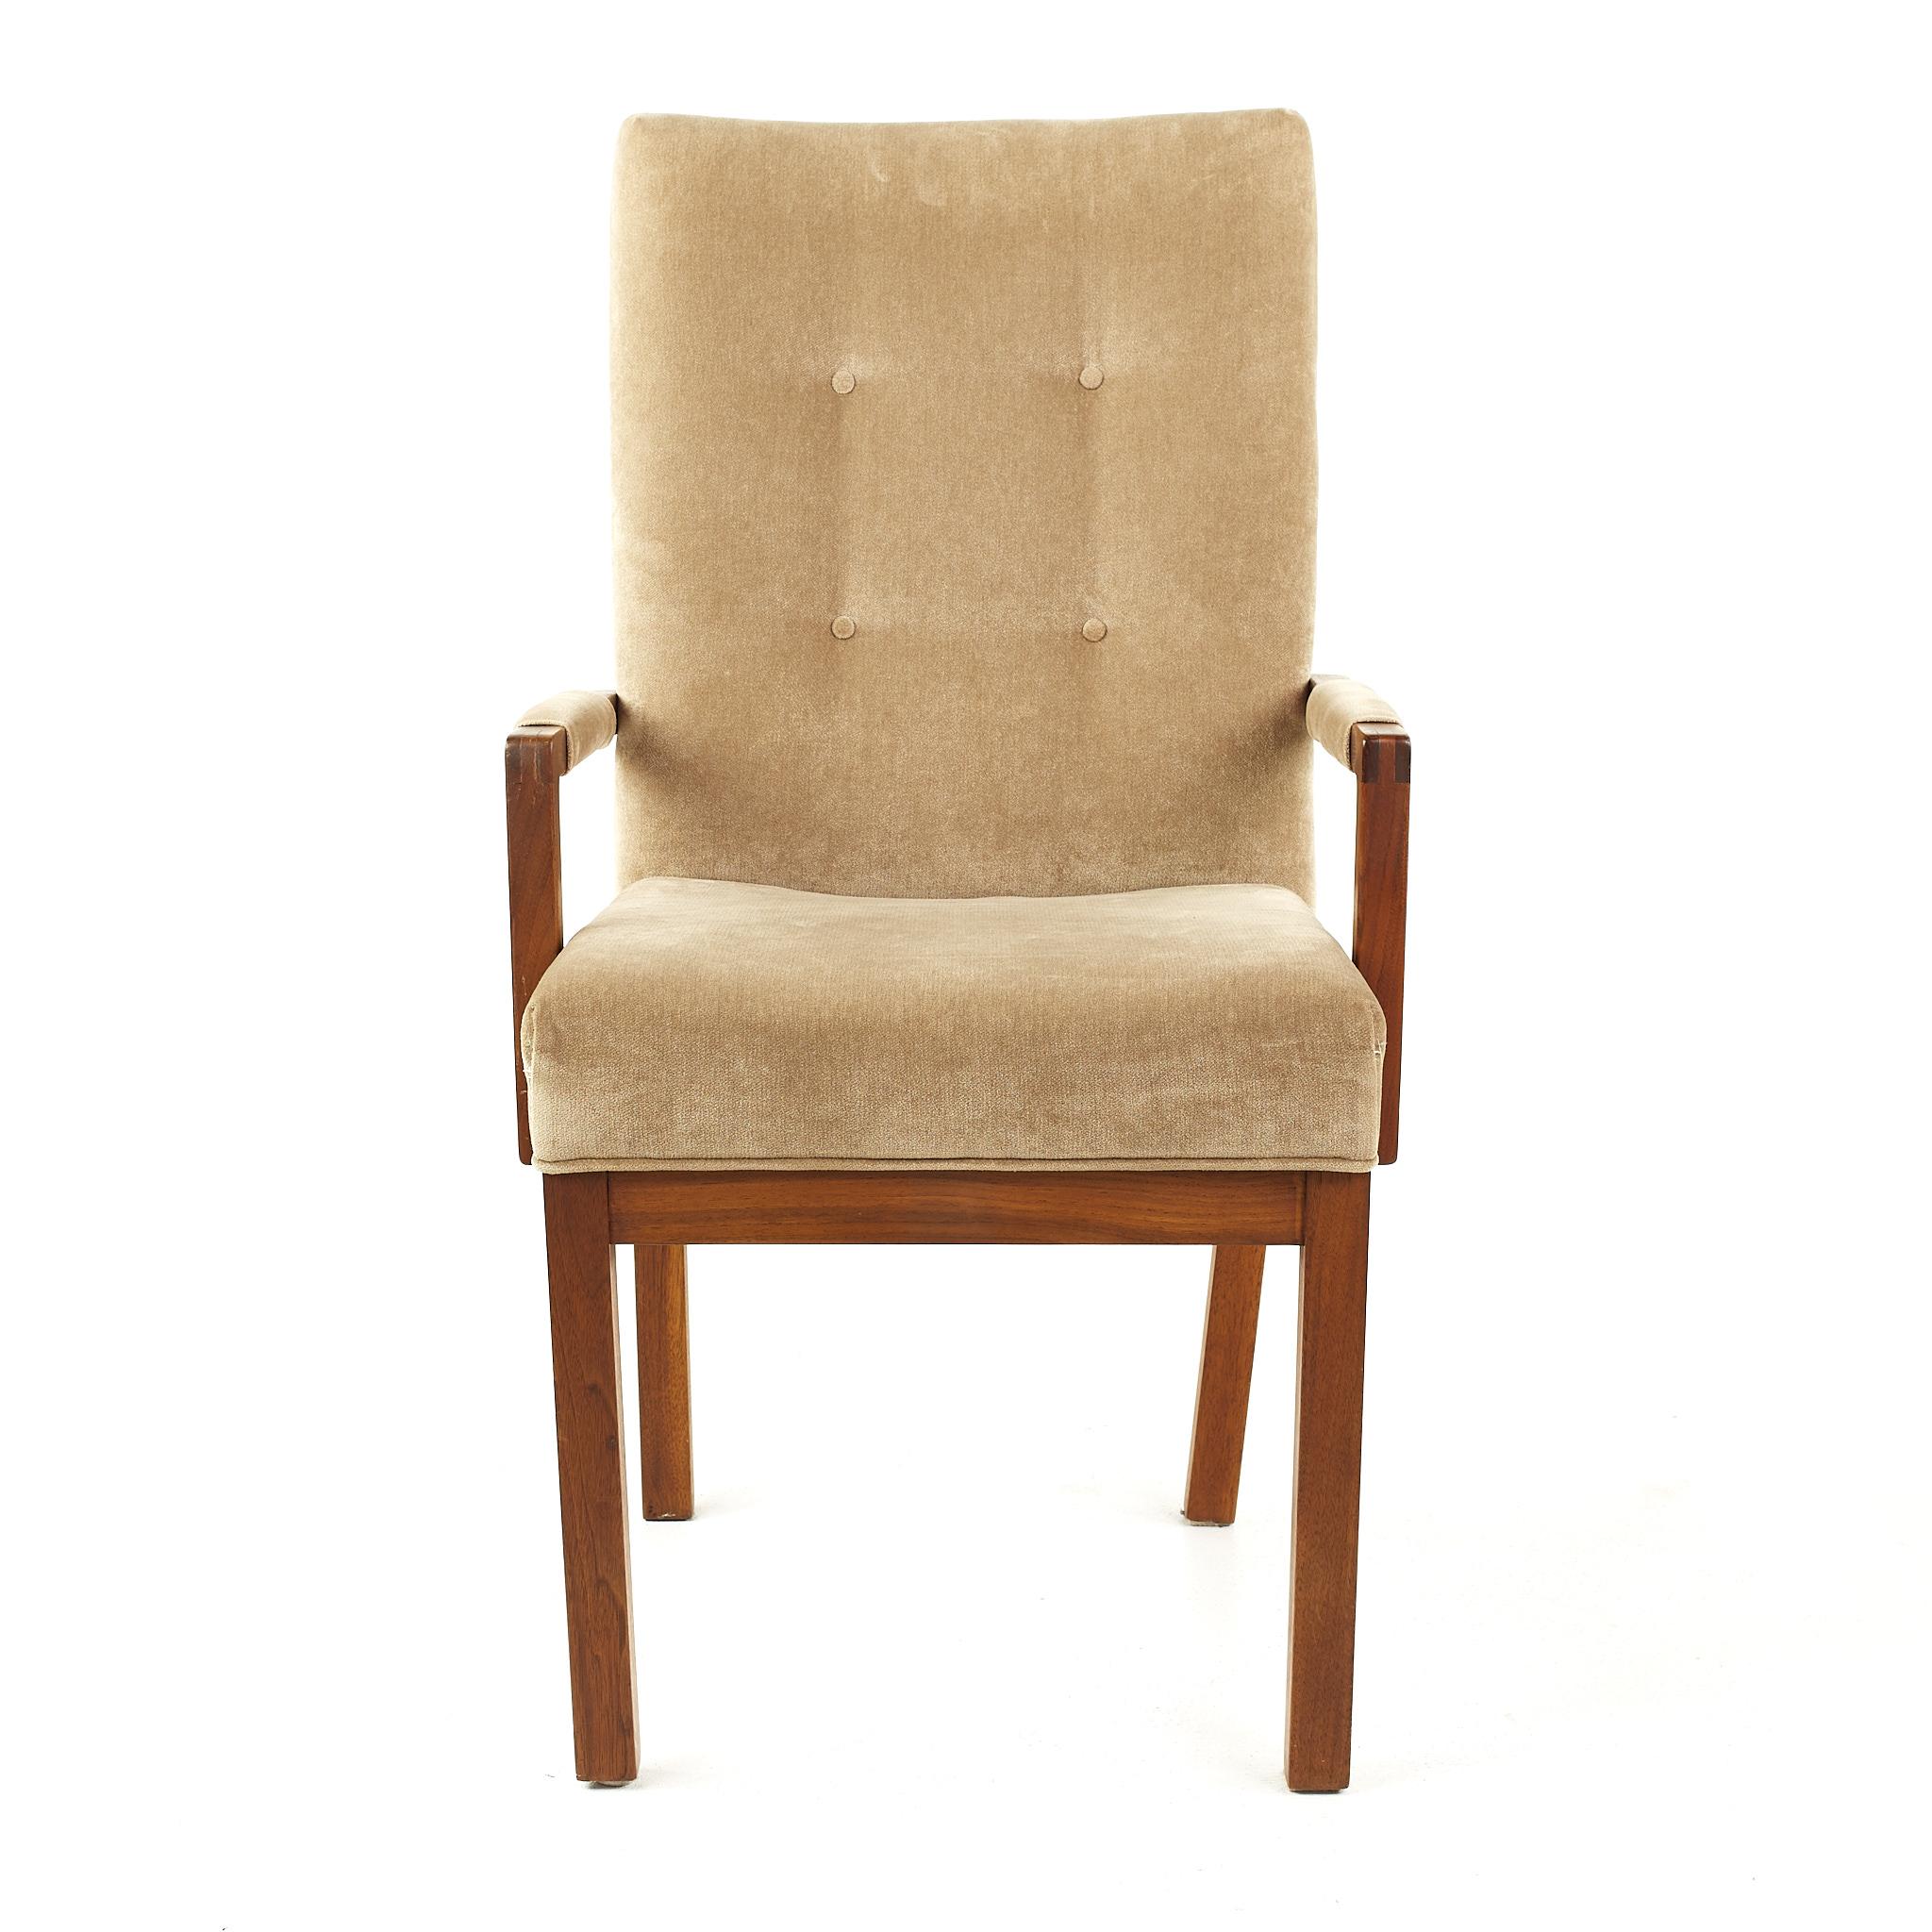 Dillingham Mid Century Walnut Tufted Dining Chairs, Set of 4 For Sale 1